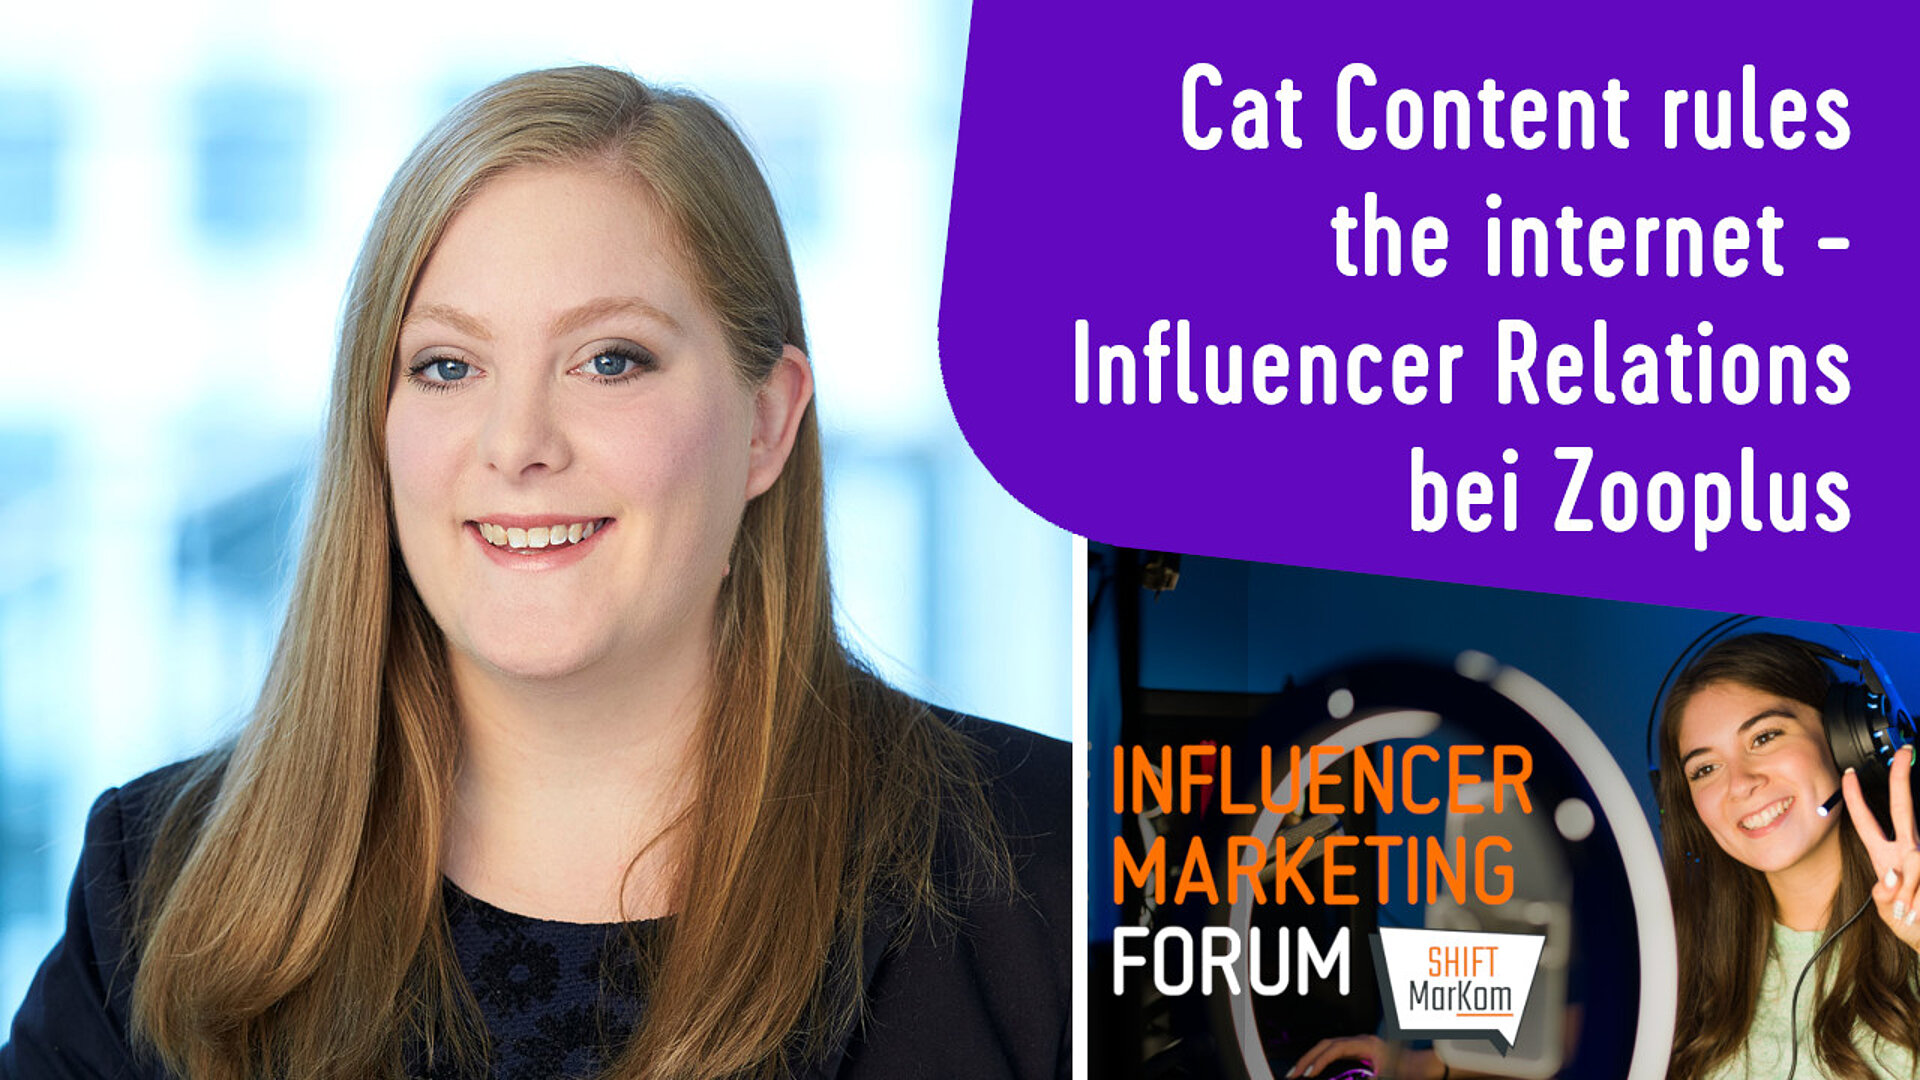 Cat Content rules the internet - Influencer Relations bei Zooplus